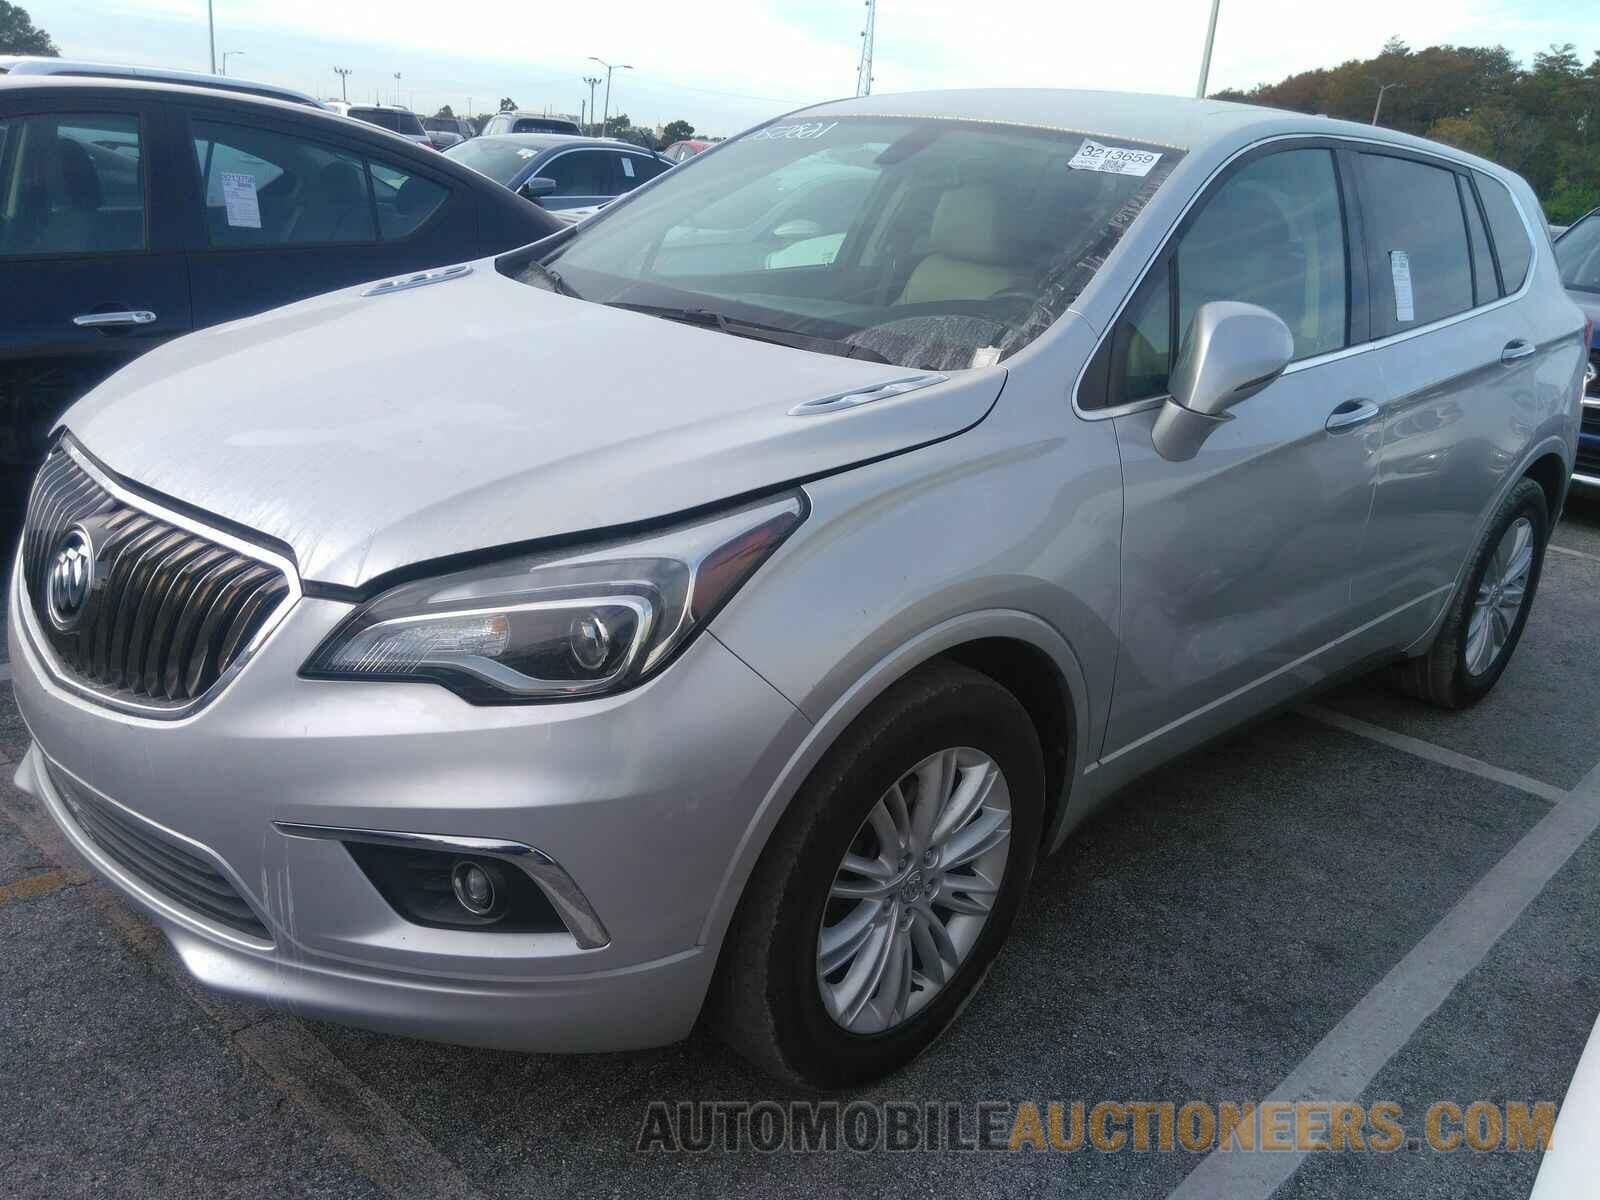 LRBFXBSA1JD052821 Buick Envision 2018